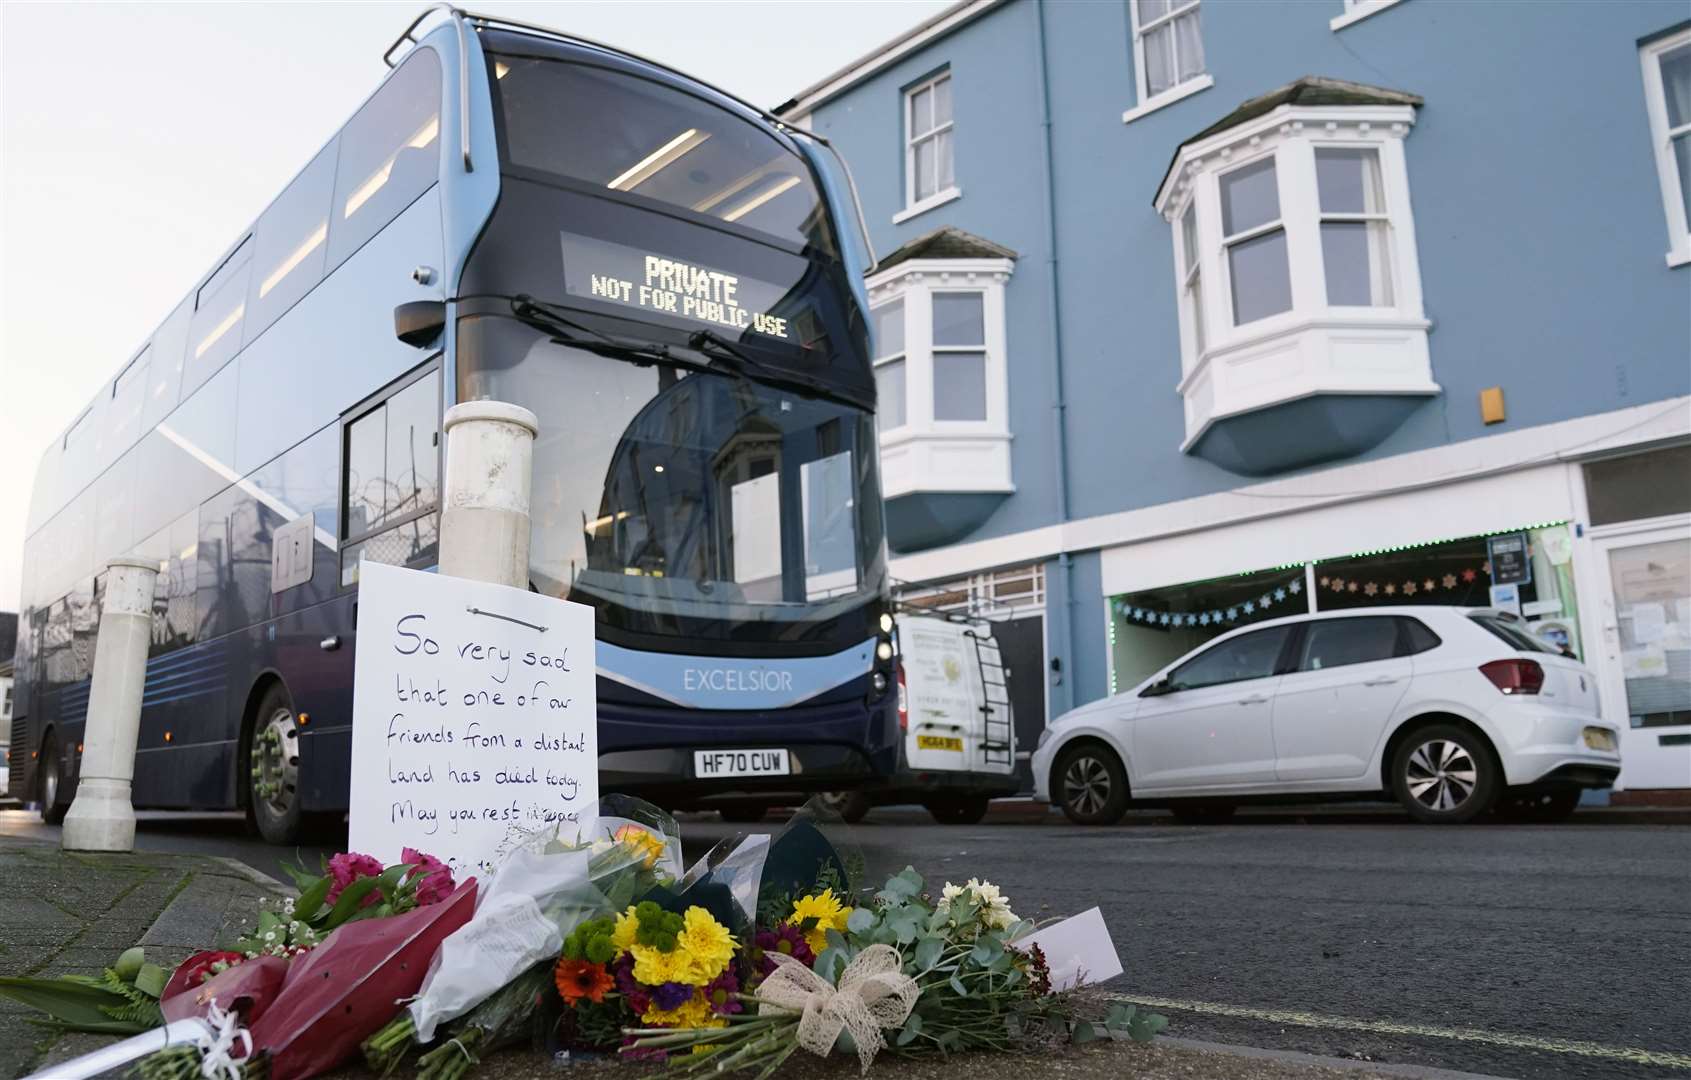 Flowers were left at the entrance to the port following Mr Farruku’s death (Andrew Matthews/PA)